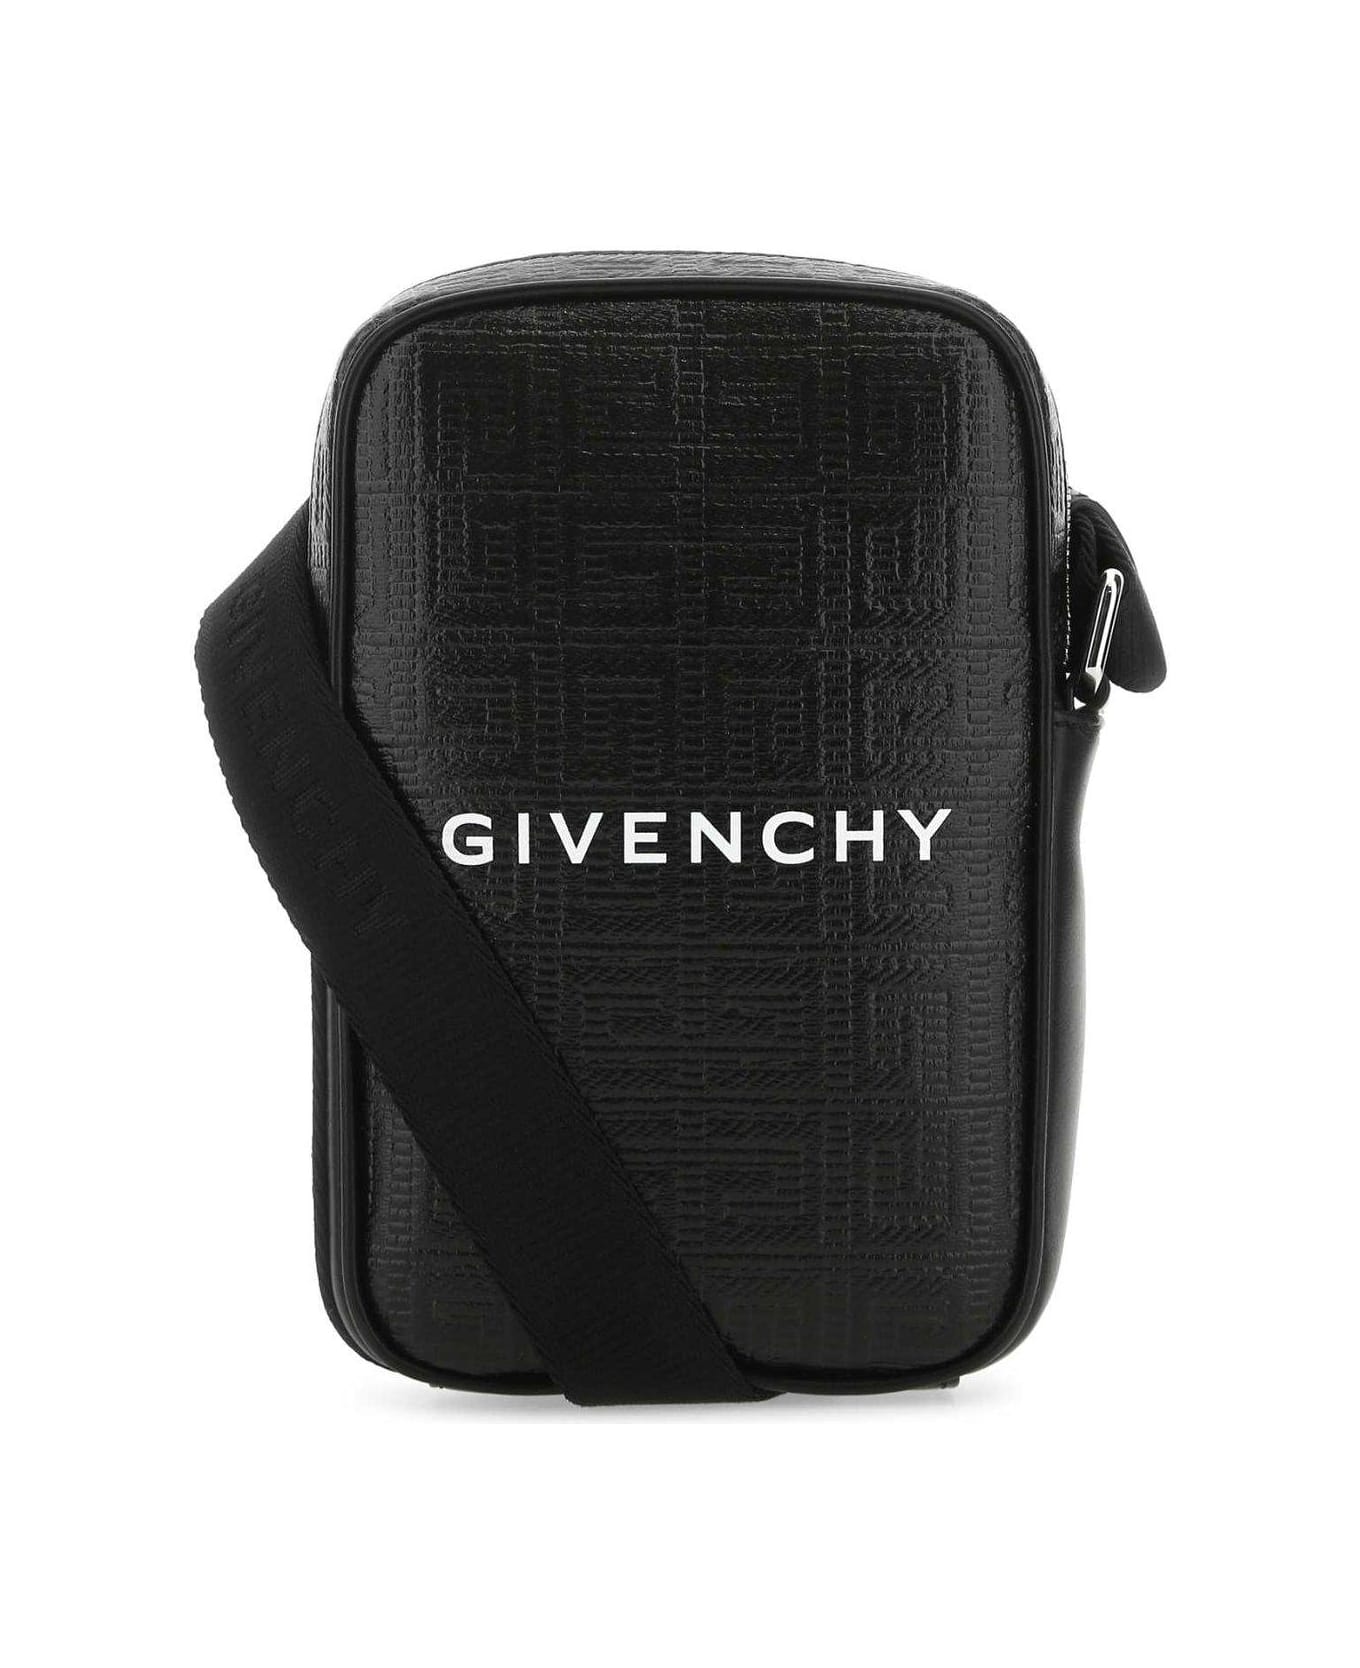 Givenchy 4g Motif Smartphone Pouch - BLACK